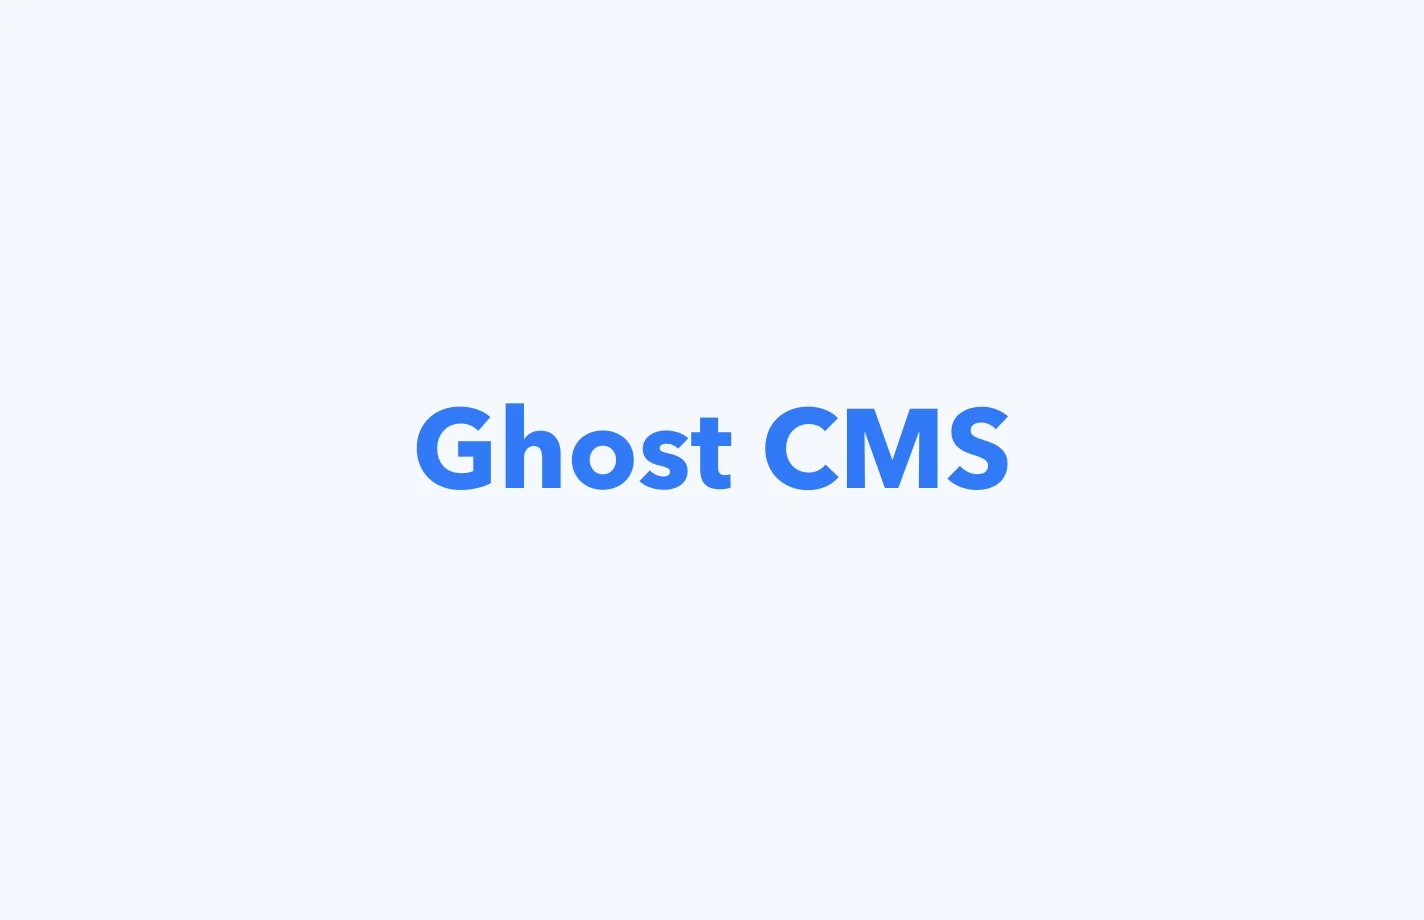 ghost cms definition what is ghost cms cover image